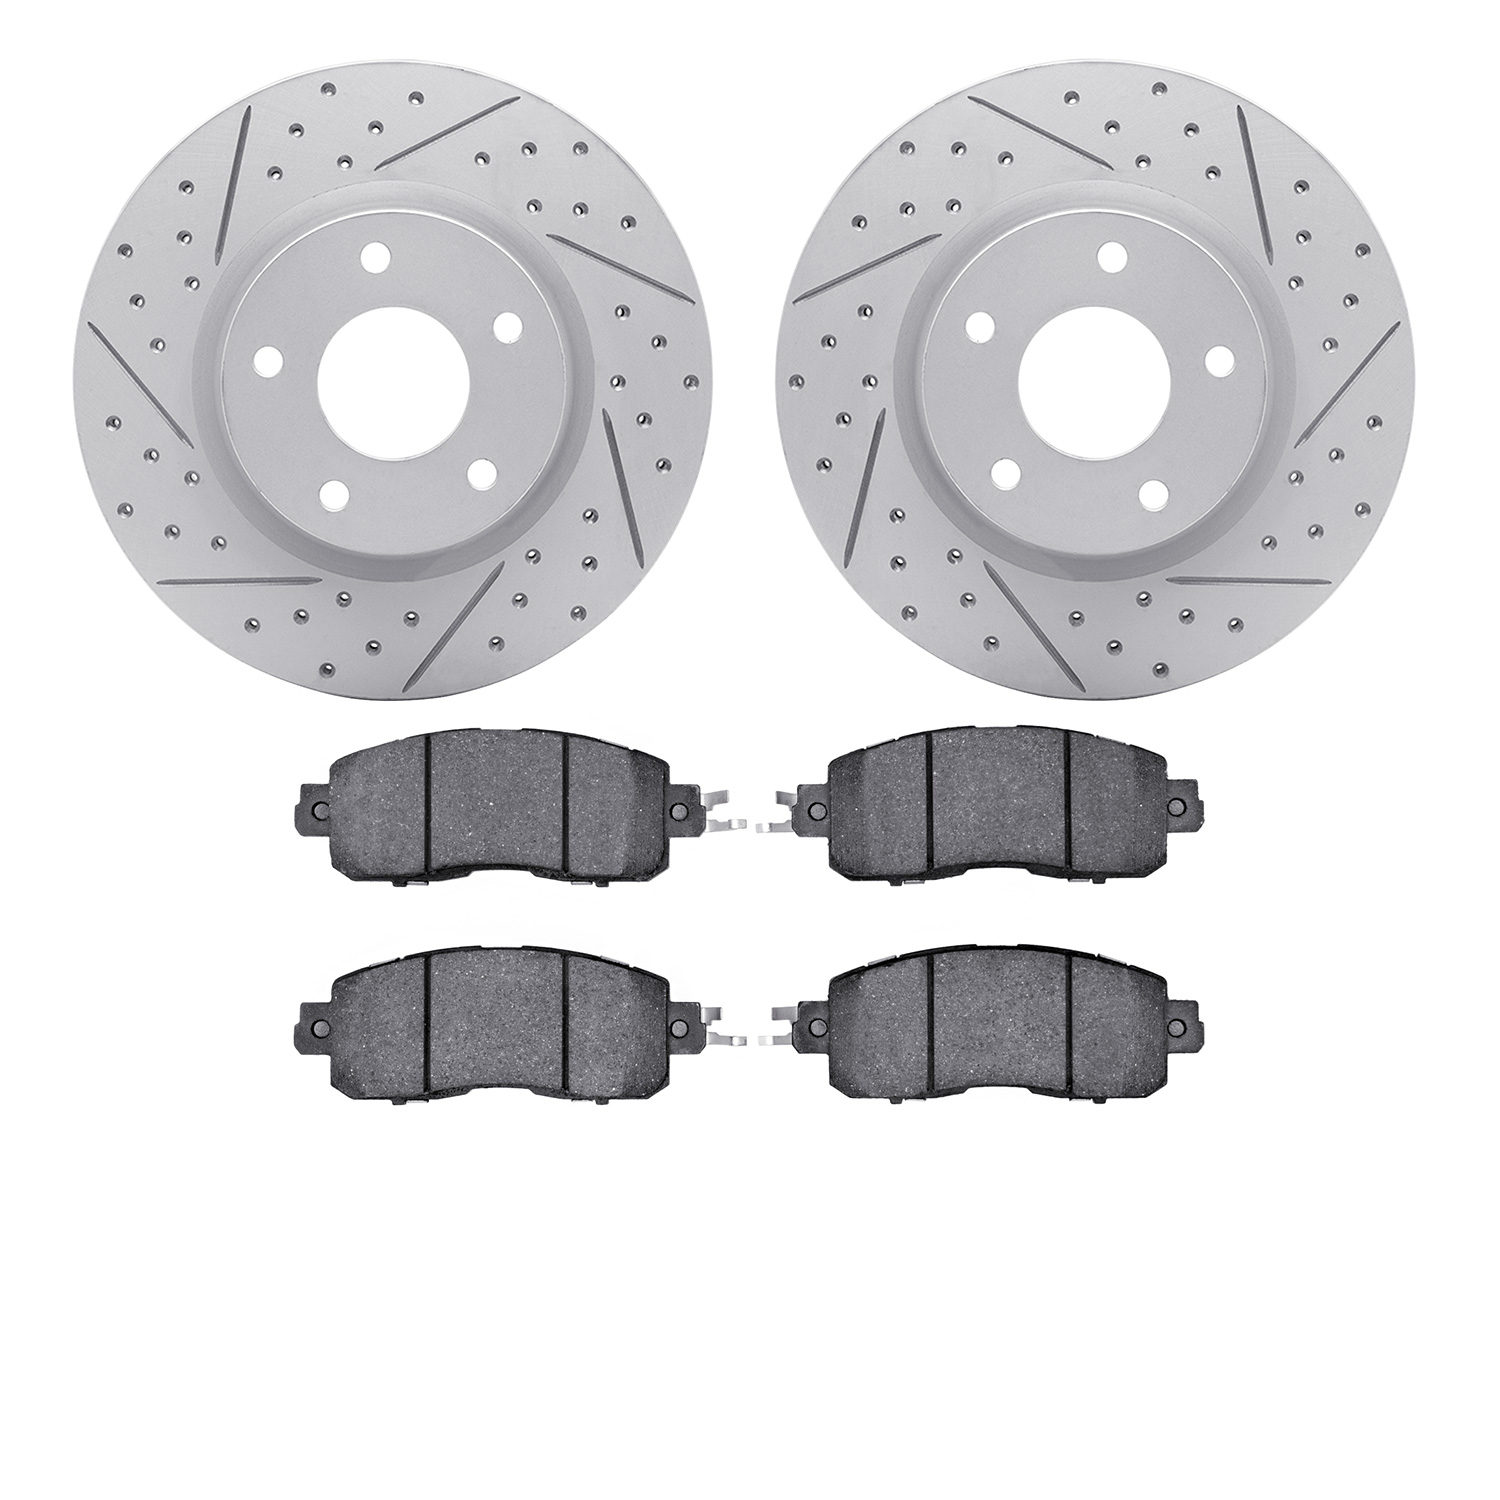 2502-67040 Geoperformance Drilled/Slotted Rotors w/5000 Advanced Brake Pads Kit, Fits Select Infiniti/Nissan, Position: Front